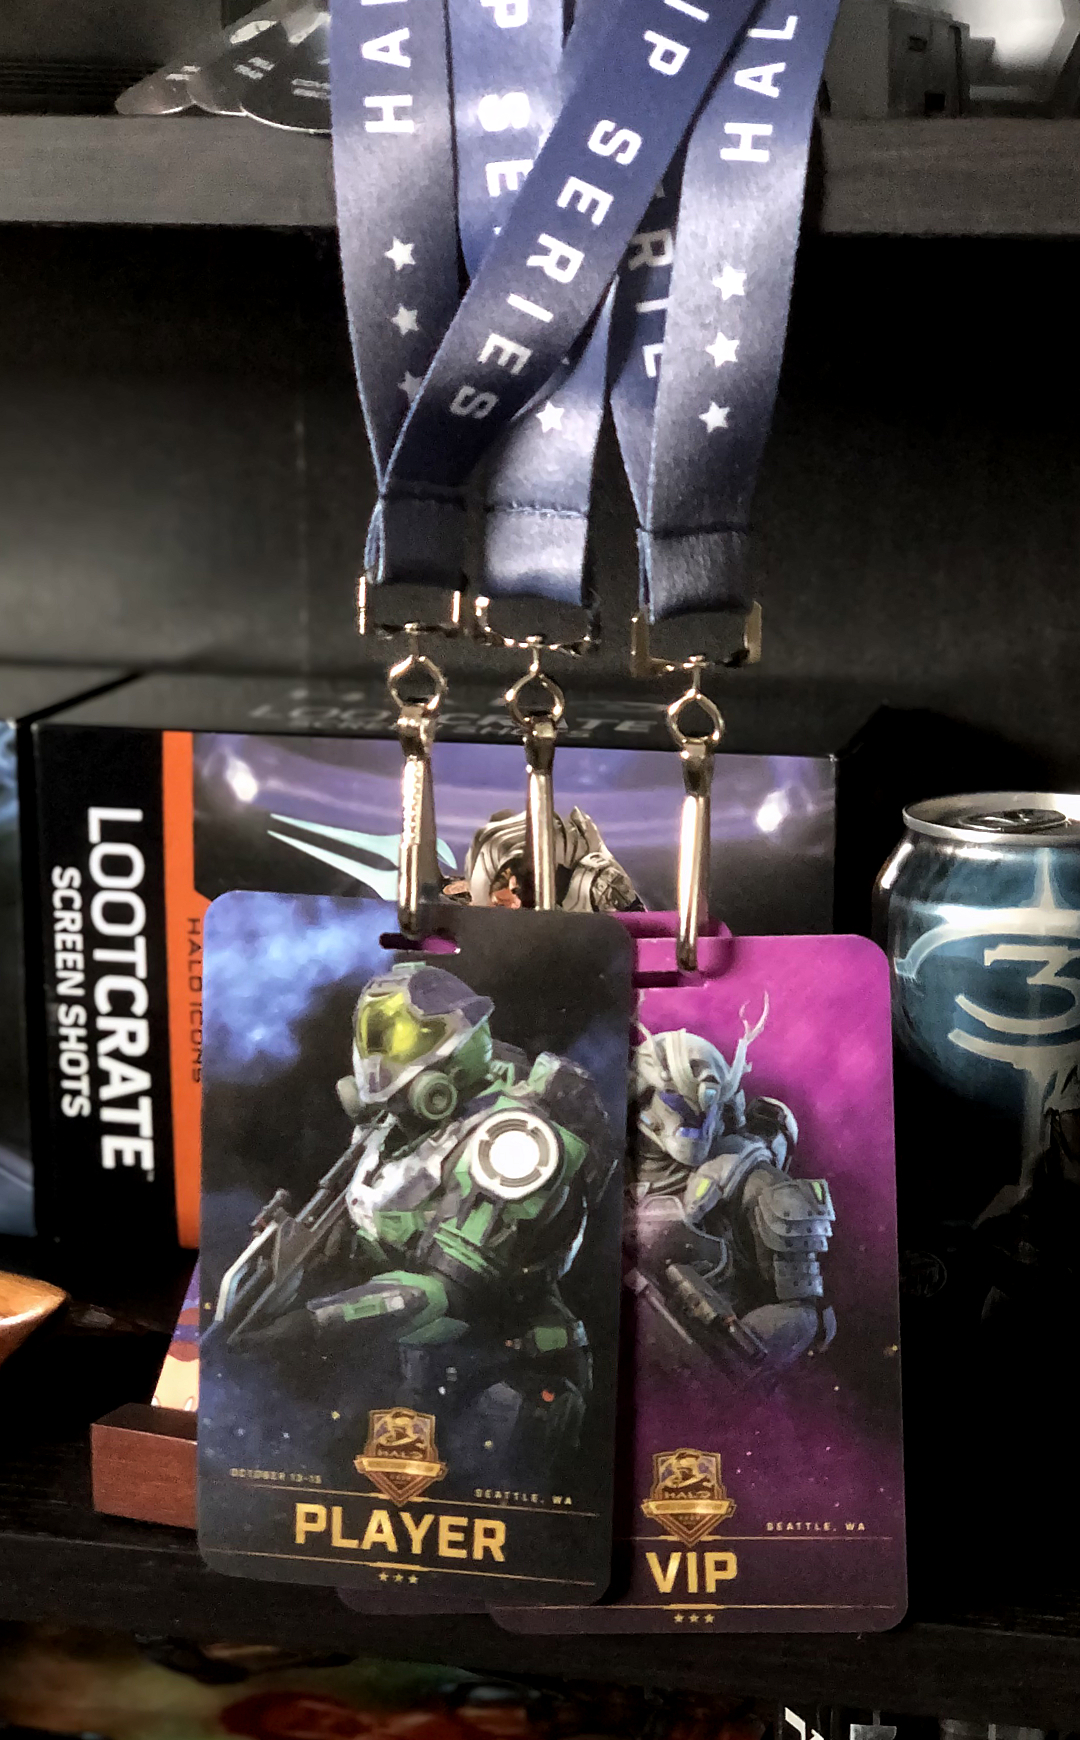 Halo World Championship badges, one for FFA and the other for VIP access.